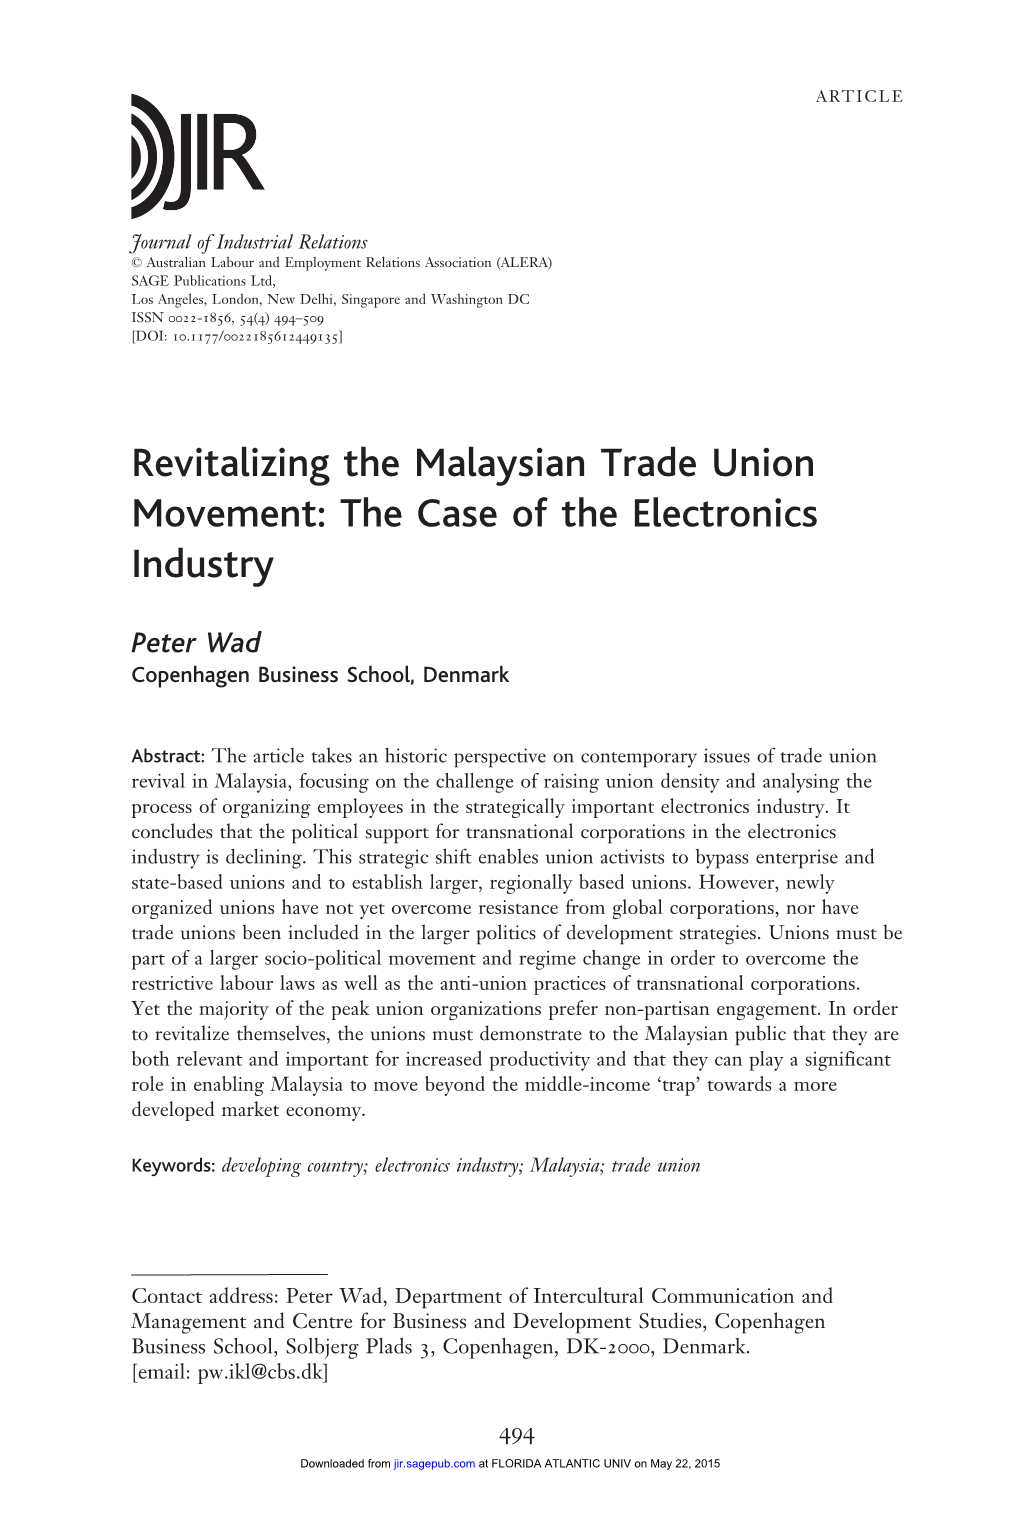 Revitalizing the Malaysian Trade Union Movement: the Case of the Electronics Industry